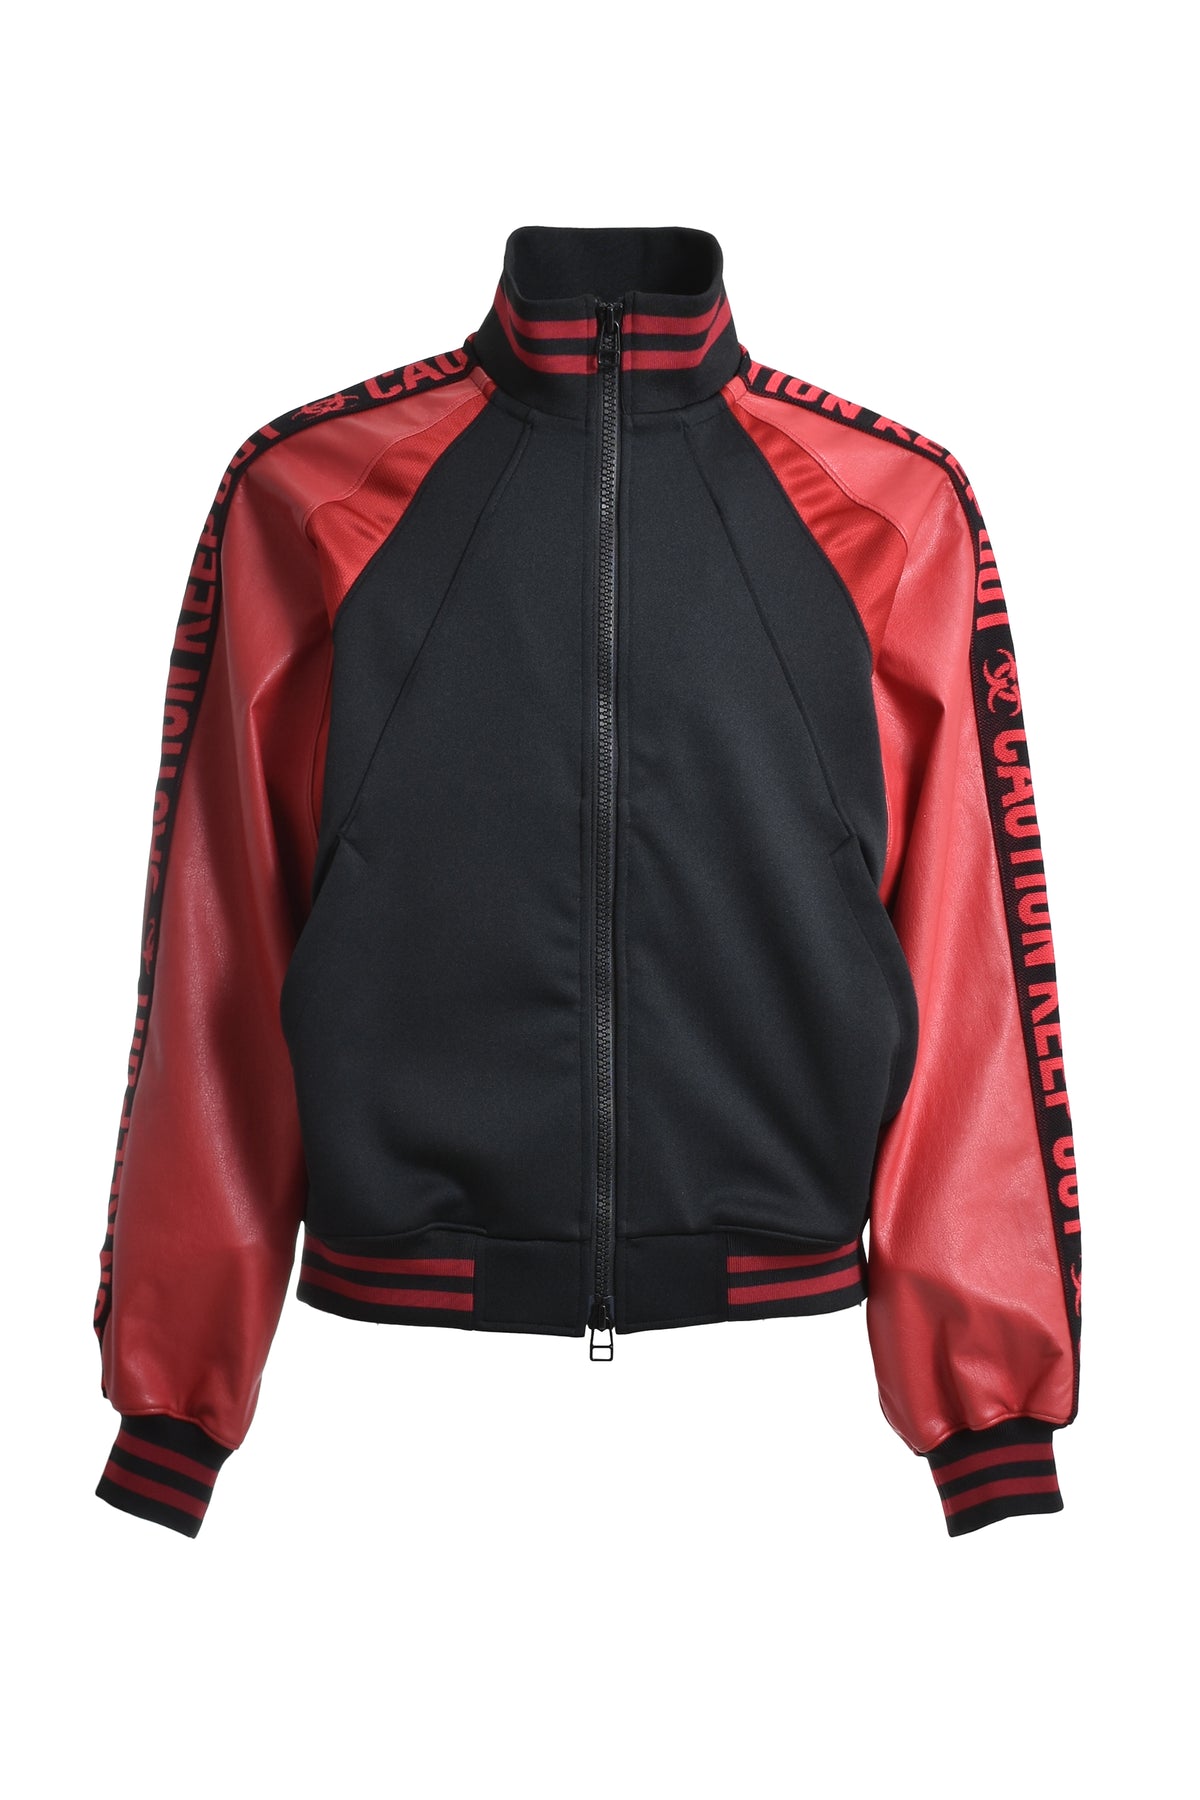 KEEP OUT TRACK JACKET CTLS VER. / BLK RED